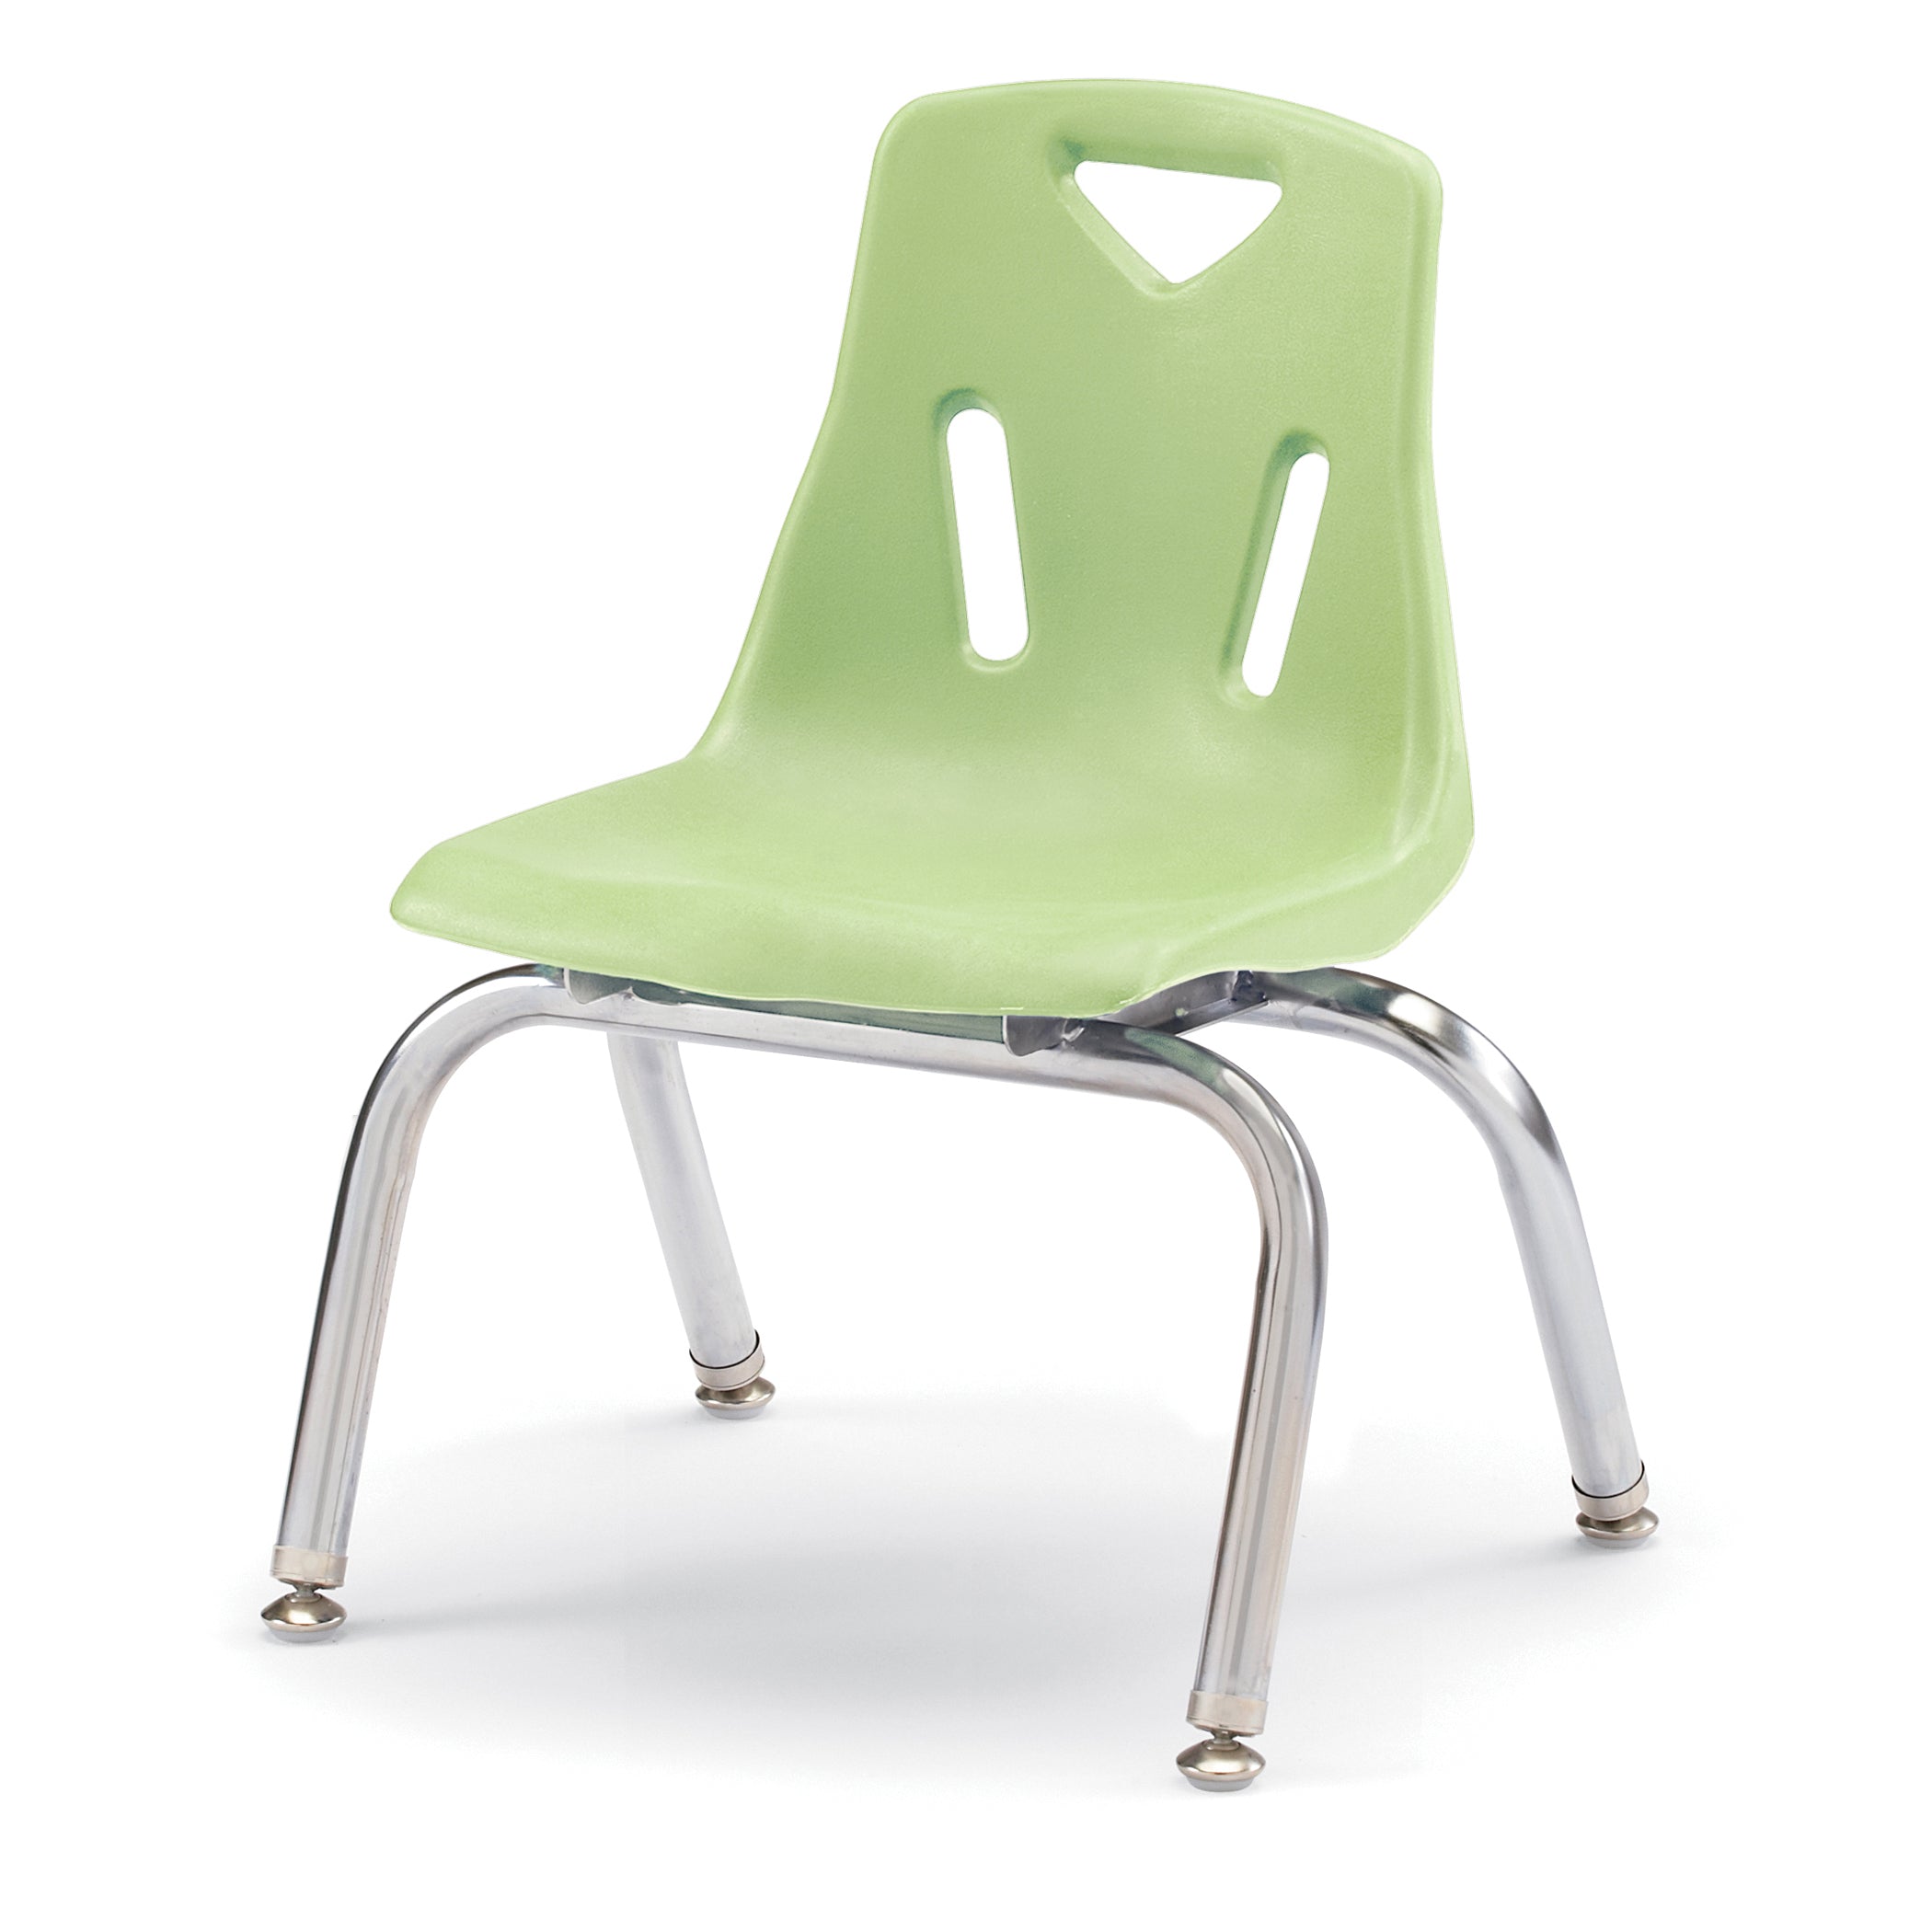 8140JC1130, Berries Stacking Chair with Chrome-Plated Legs - 10" Ht - Key Lime